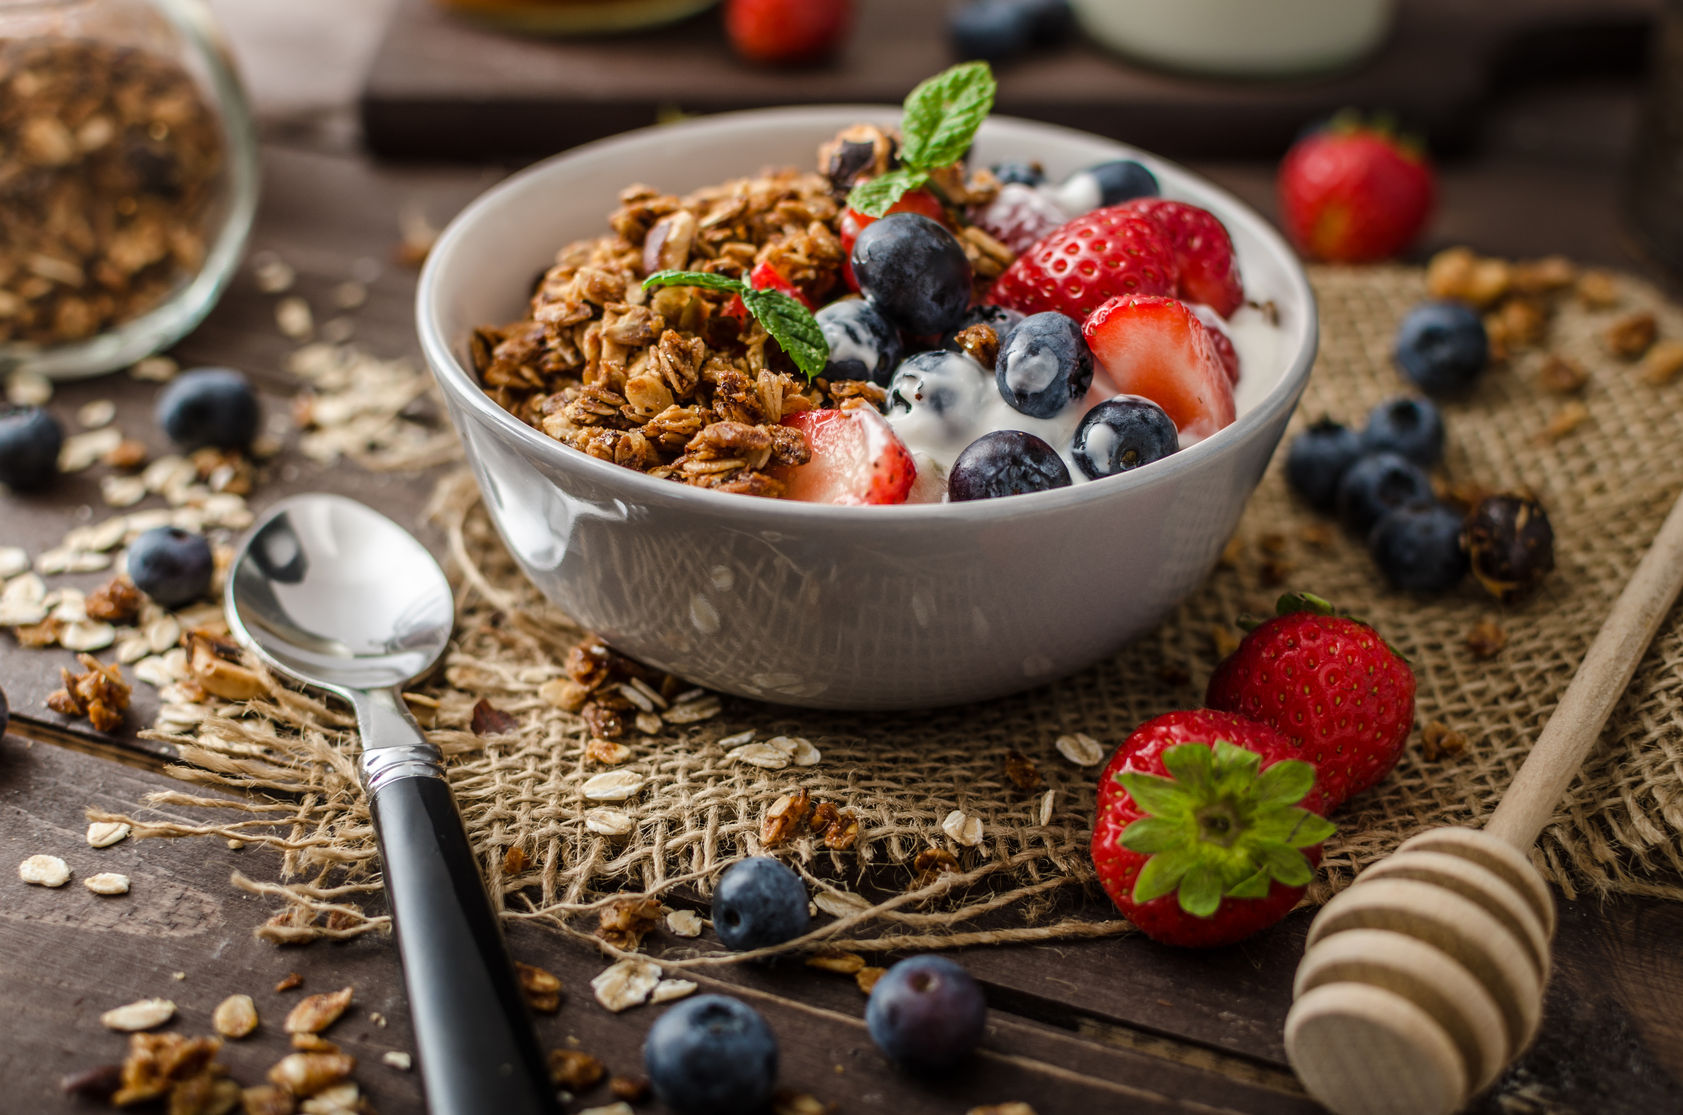 Make Your Own Healthy Crunchy Granola